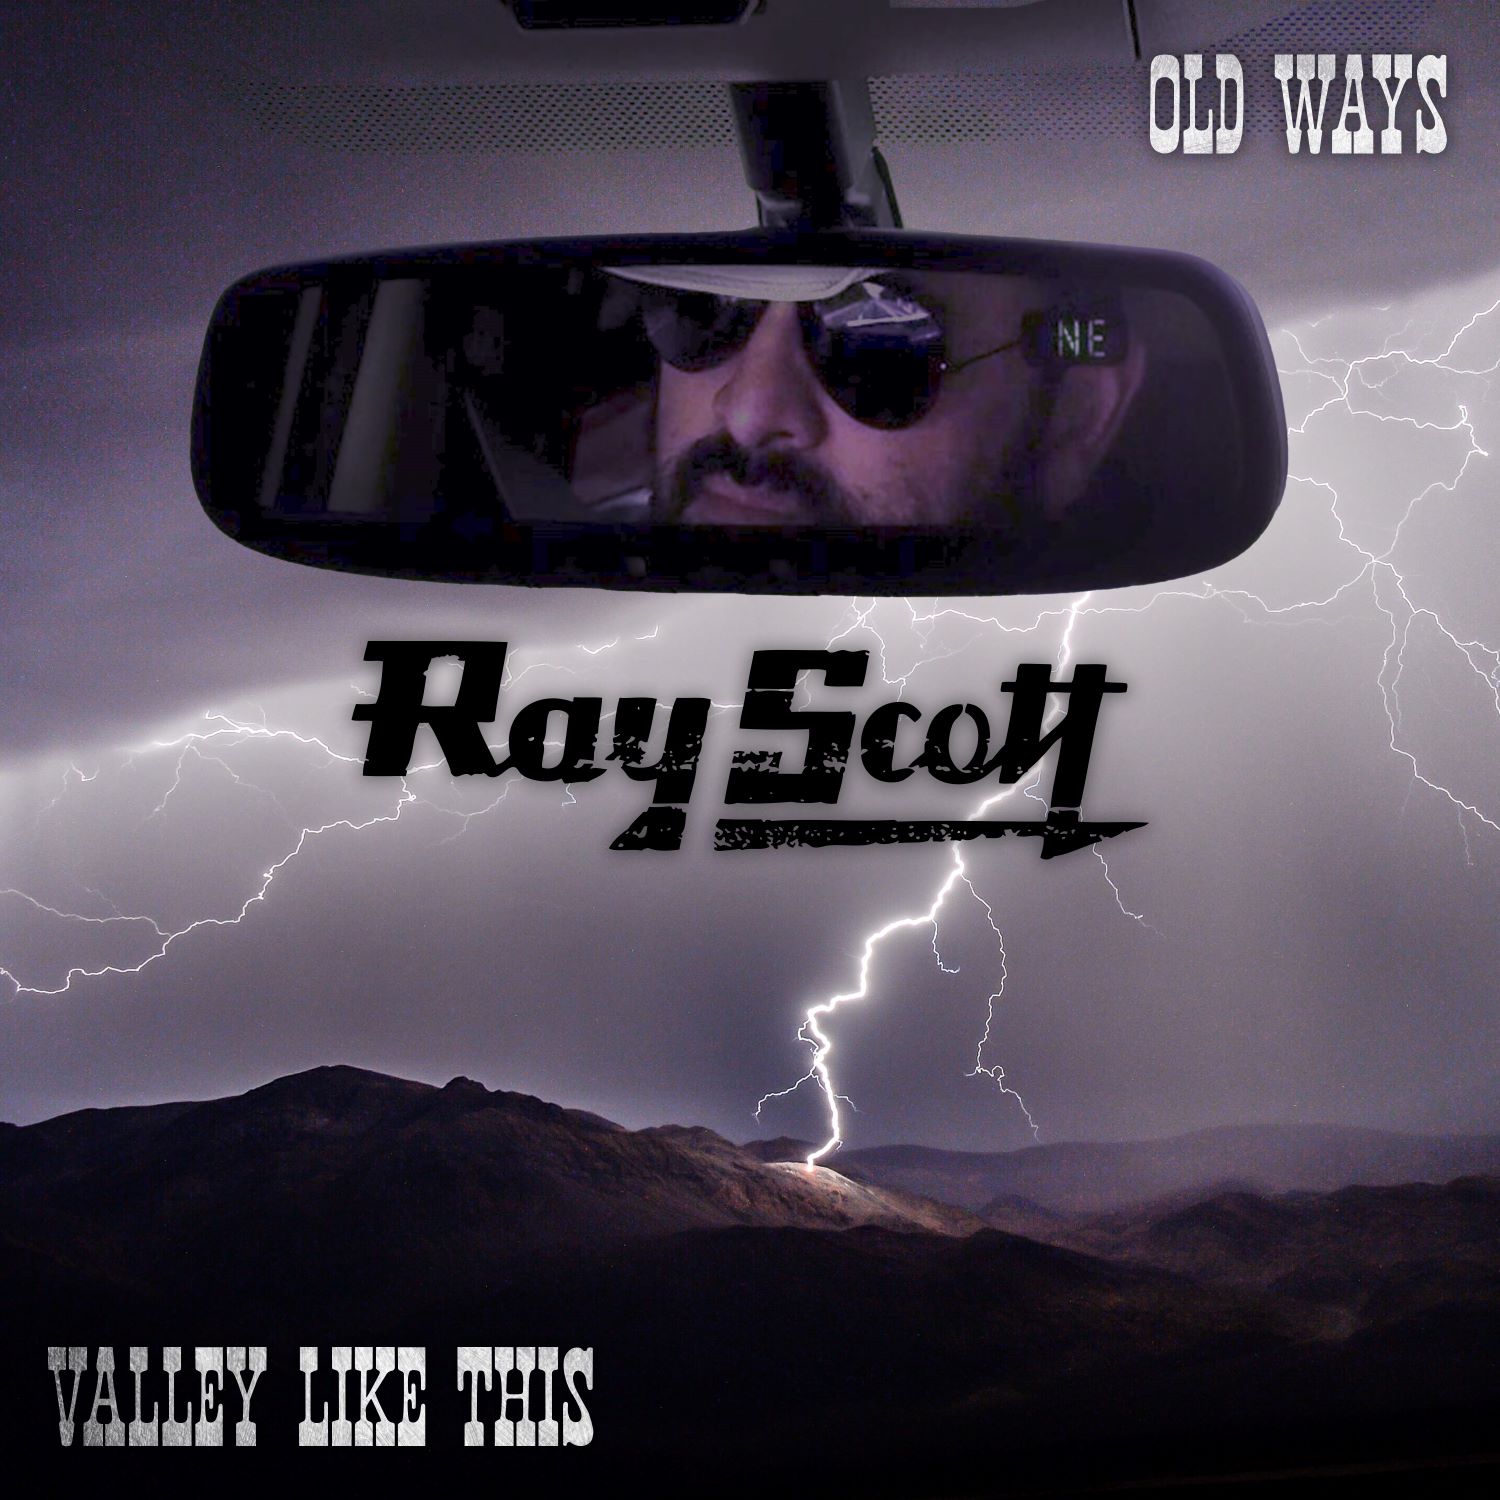 Ray Scott - "Valley Like This / Old Ways" for Country New Music Friday